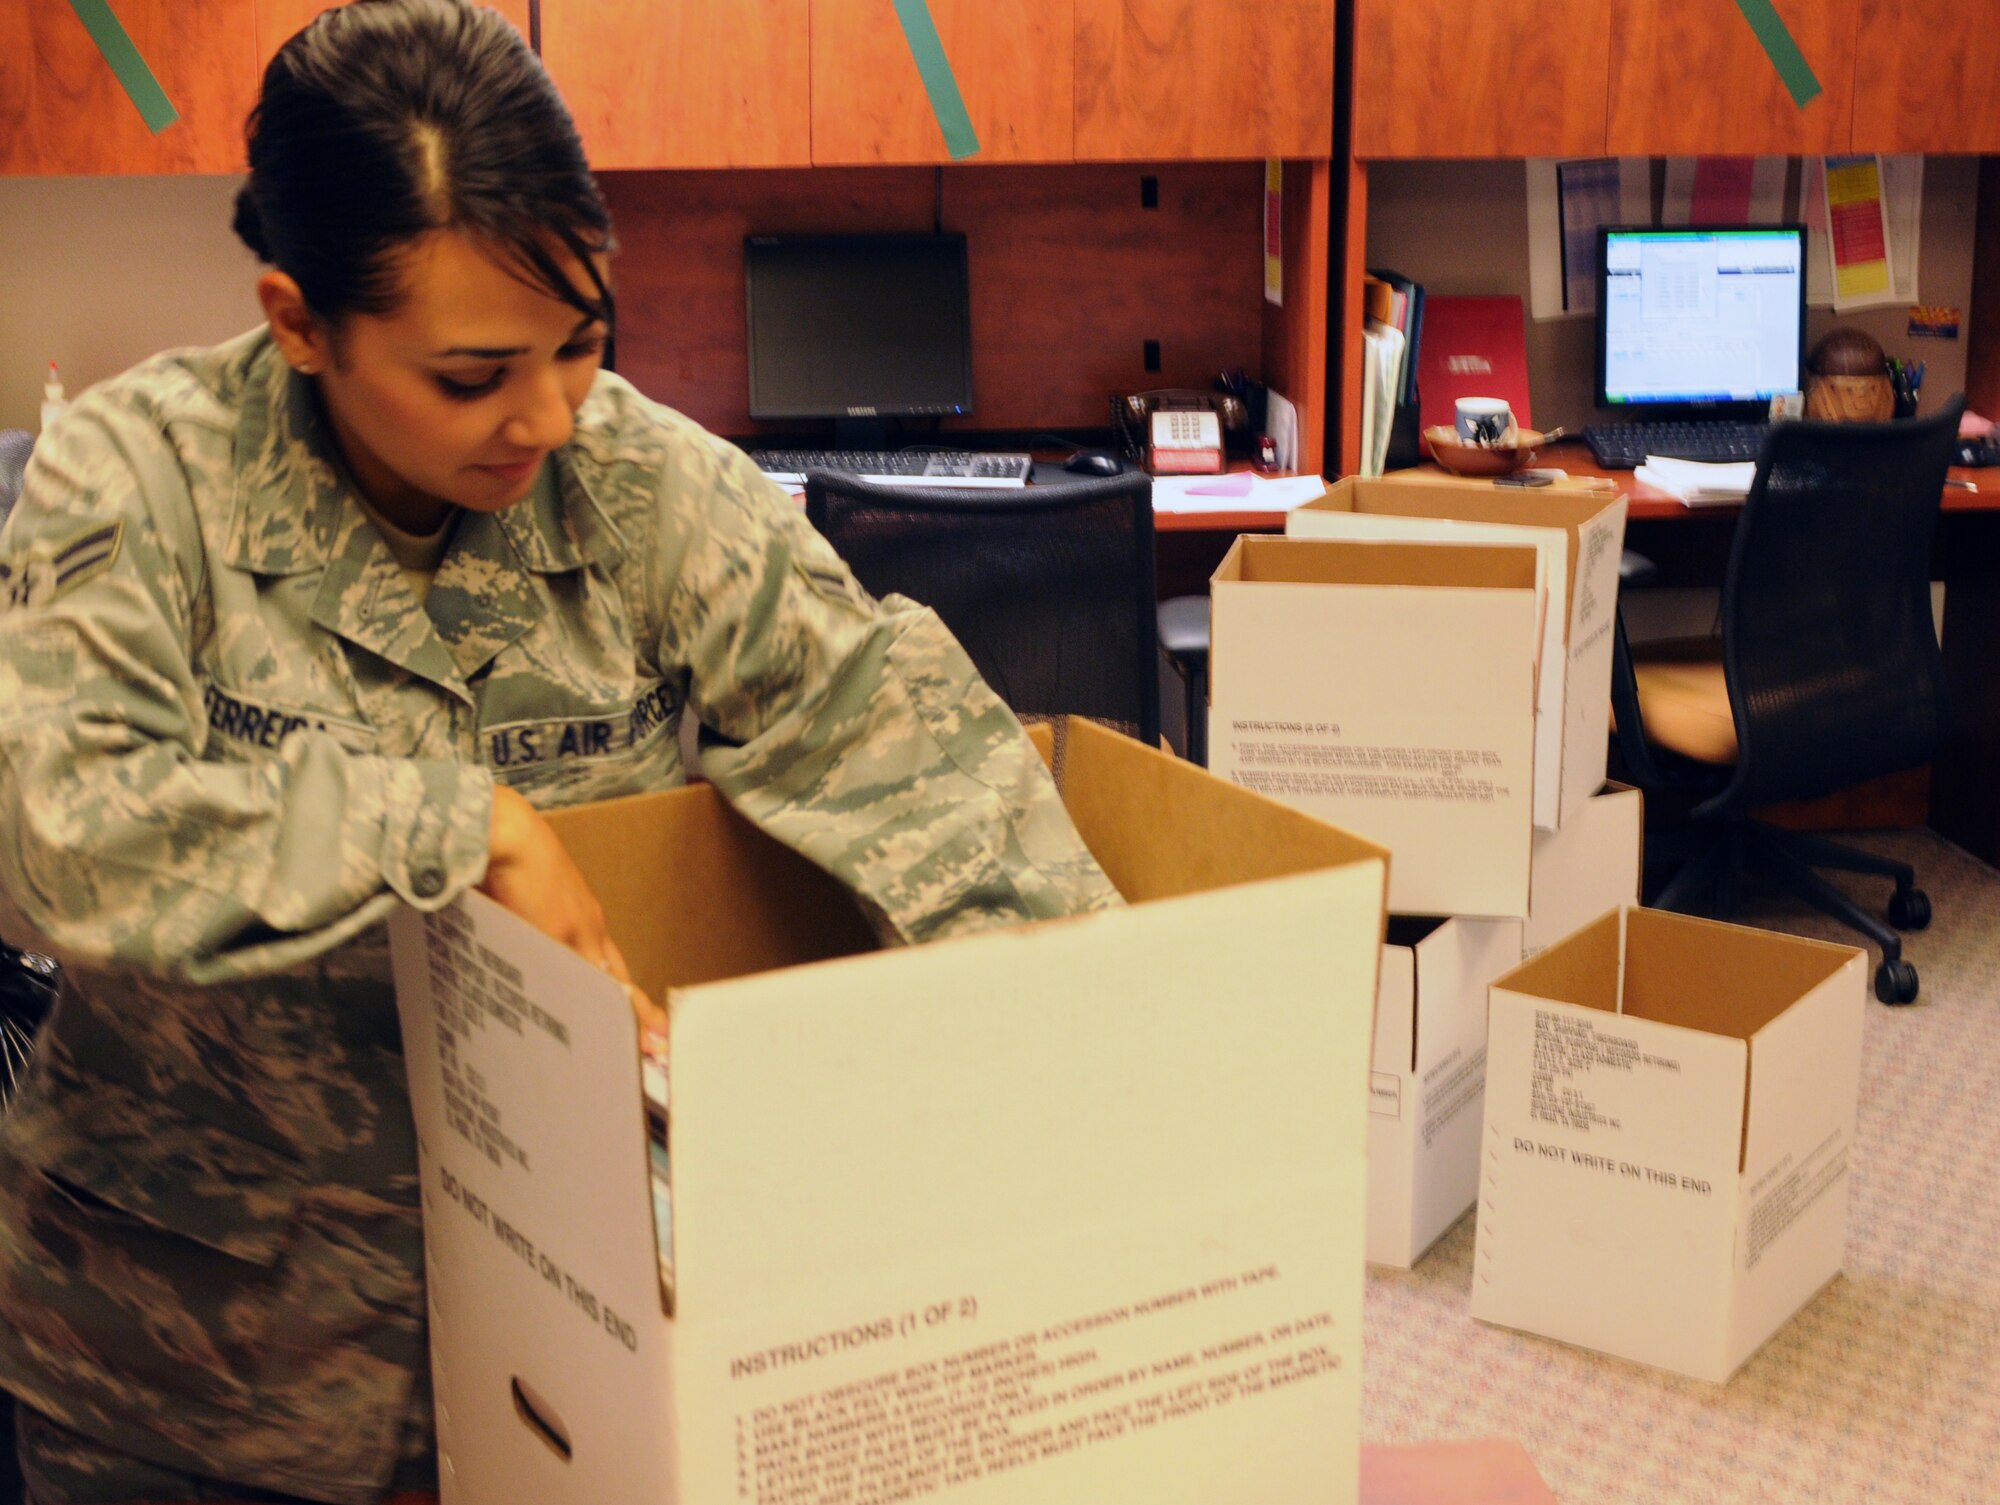 In preparation for the remodeling of building 44, Airman 1st Class Vanessa Ferreria, aviation resource manager, packs her office Aug. 8 to move near building 40, also known as the Bell Building. The remodeling is scheduled to take 18 to 24 months during which time Operations Group and 152nd Fighter Squadron personnel will function primarily from trailers. (Air Force photo by Staff Sgt. Jordan Jones)